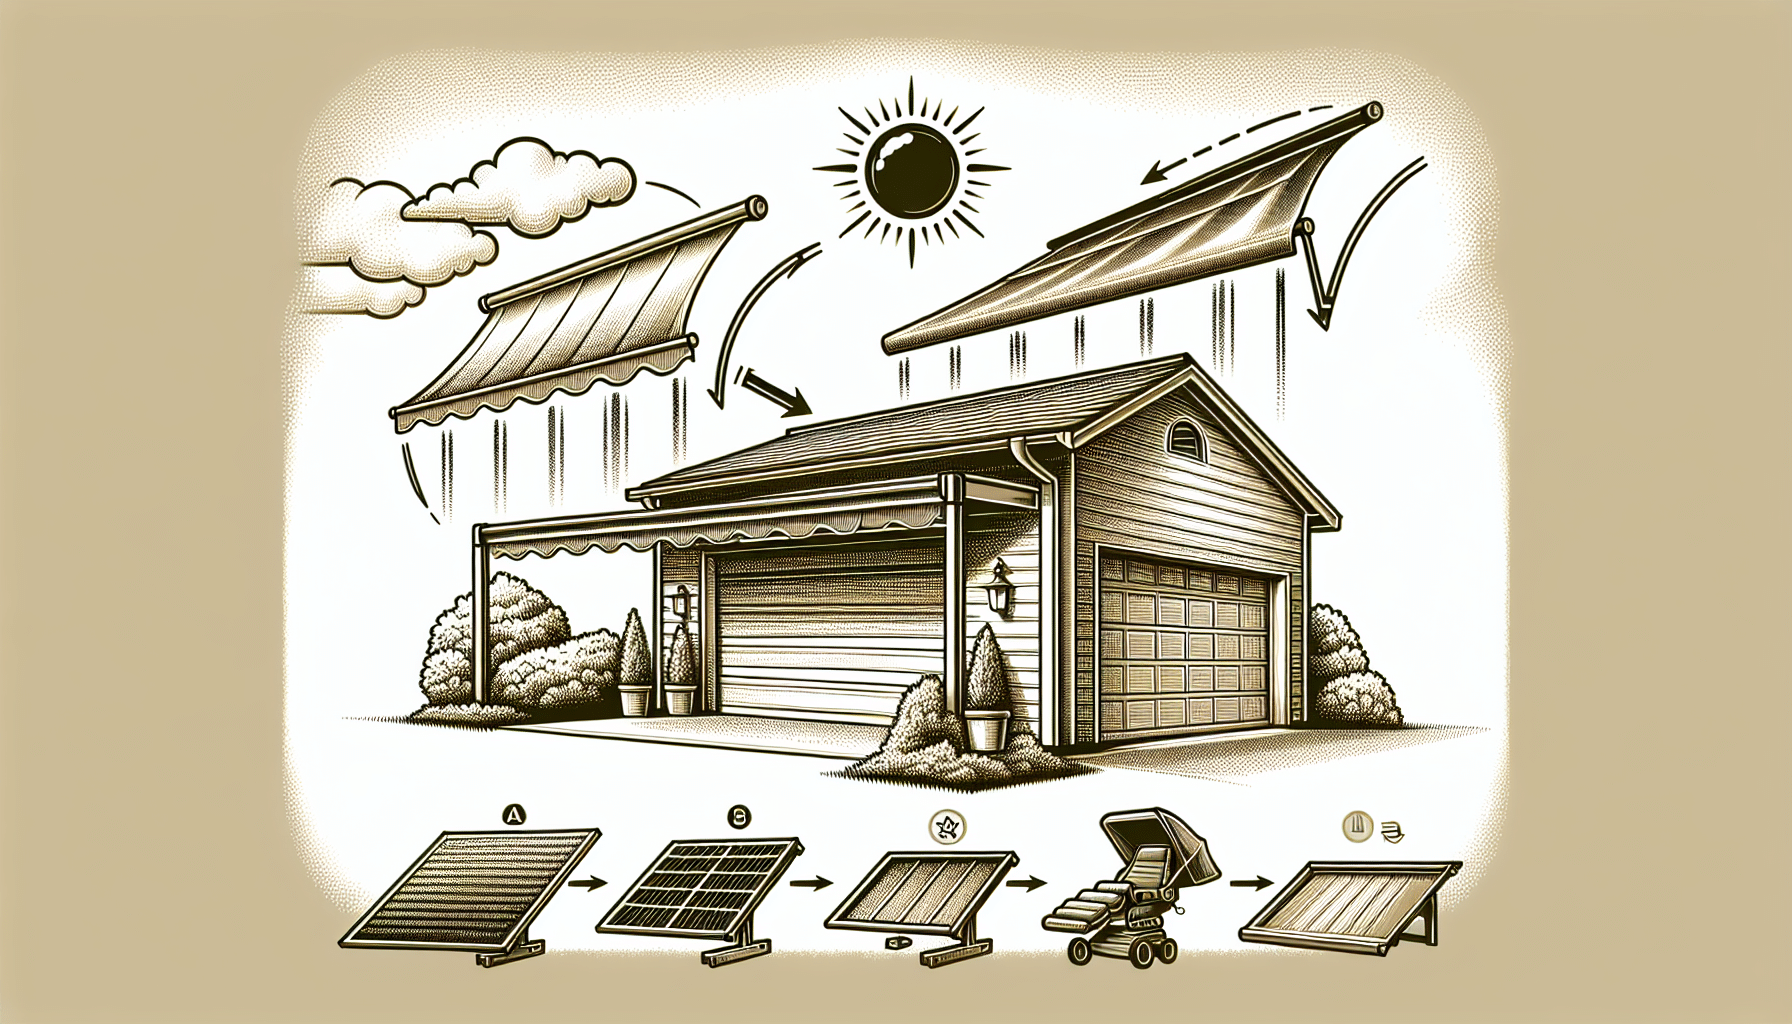 Illustration of awnings and canopies shading a garage